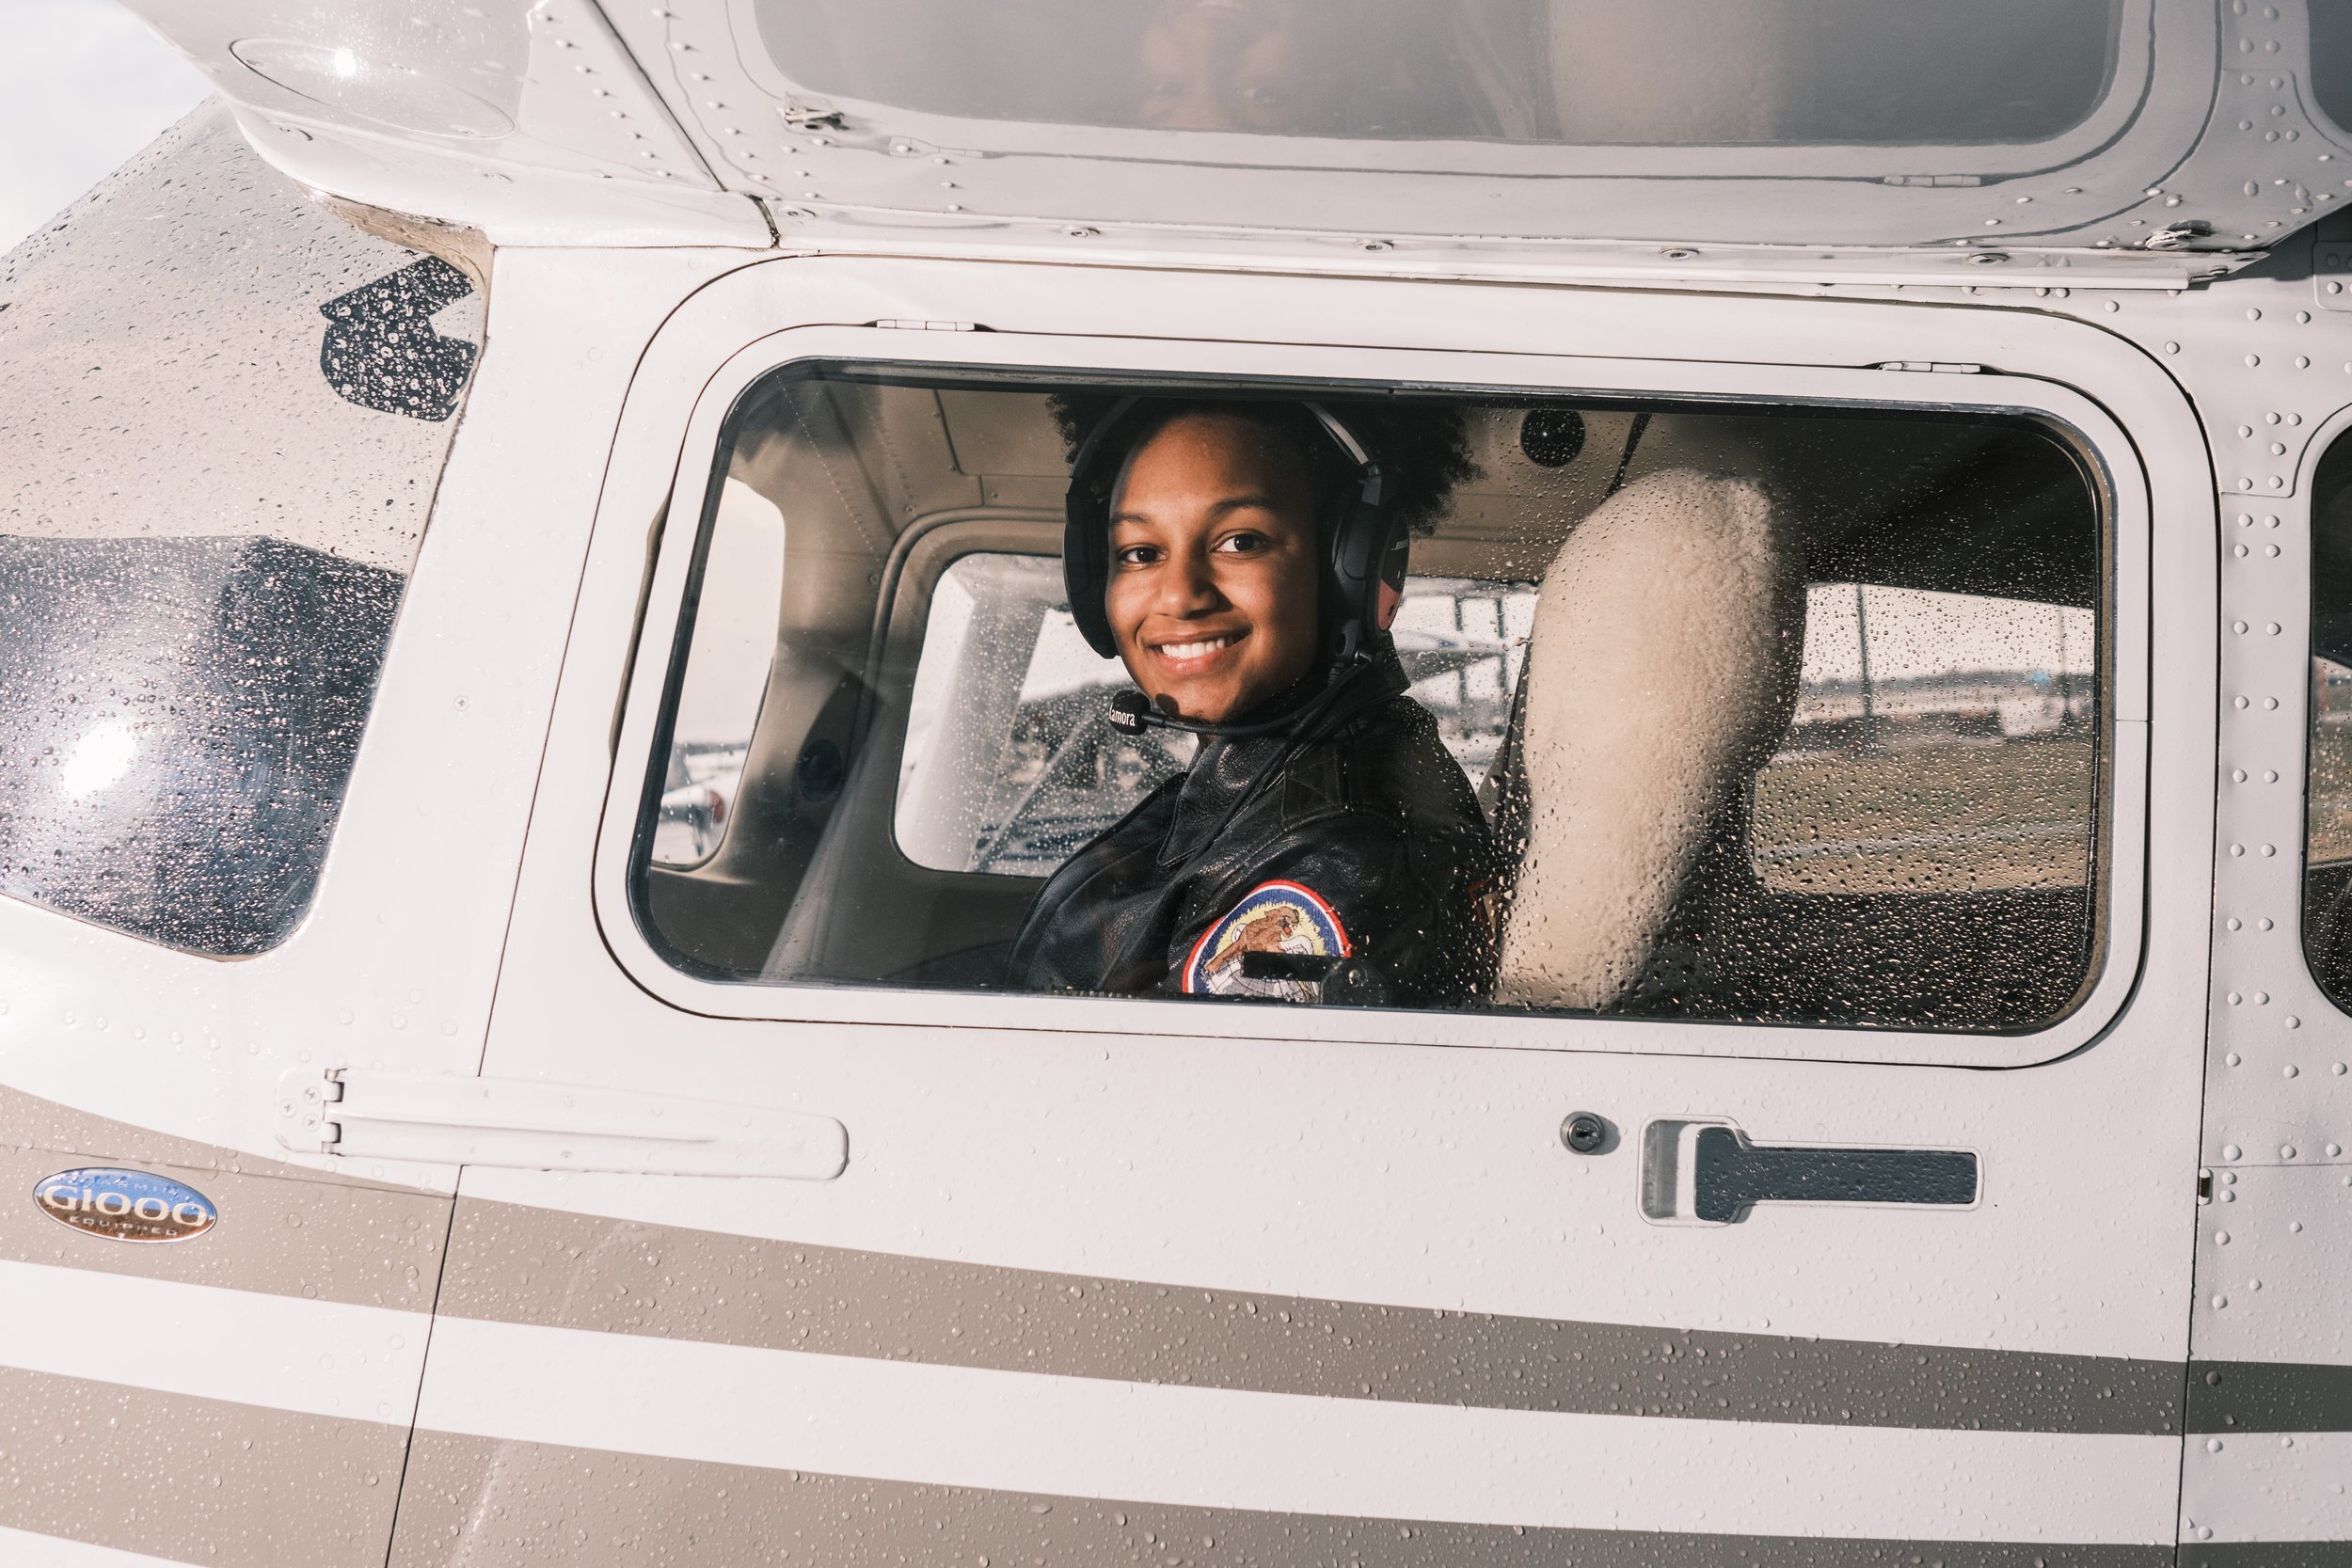  Kamora Freeland, 17, one of the youngest Black pilots in the country.  